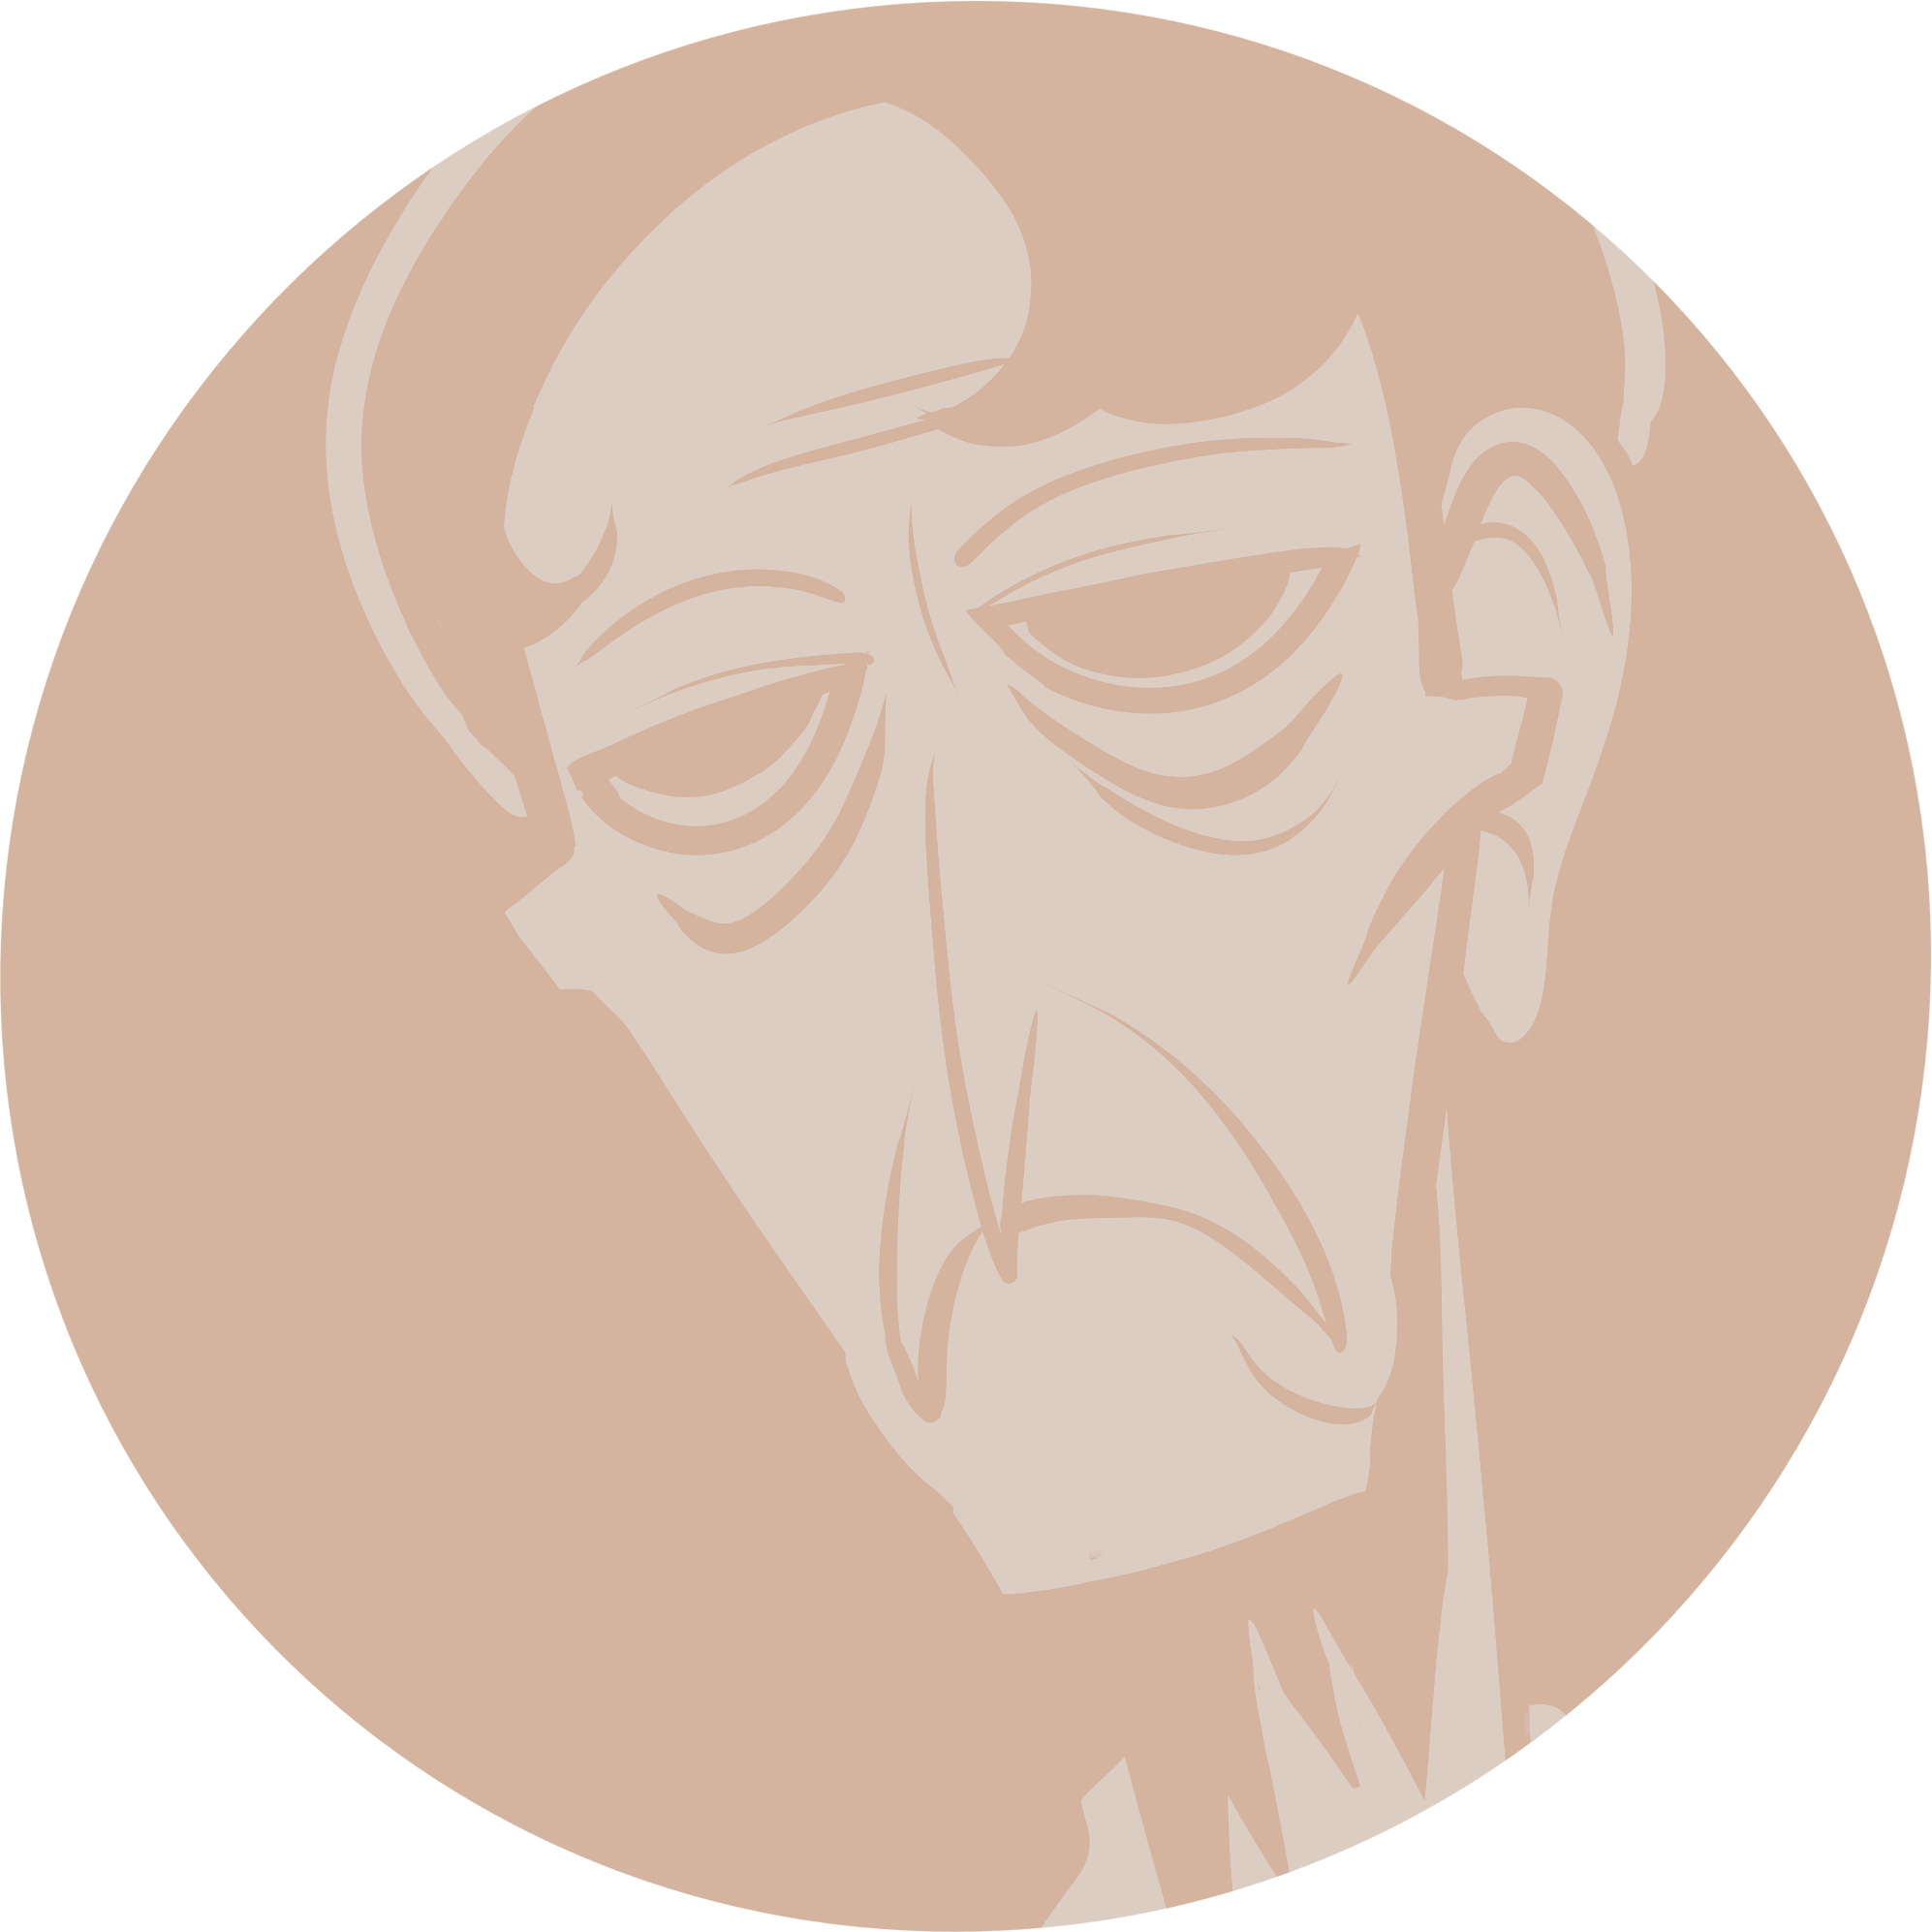 Image of Mr Brown. He is old, and skeletal. He has a long, slightly downturnt nose, and noticable cheekbones. He has brown, lifeless semicircle eyes.